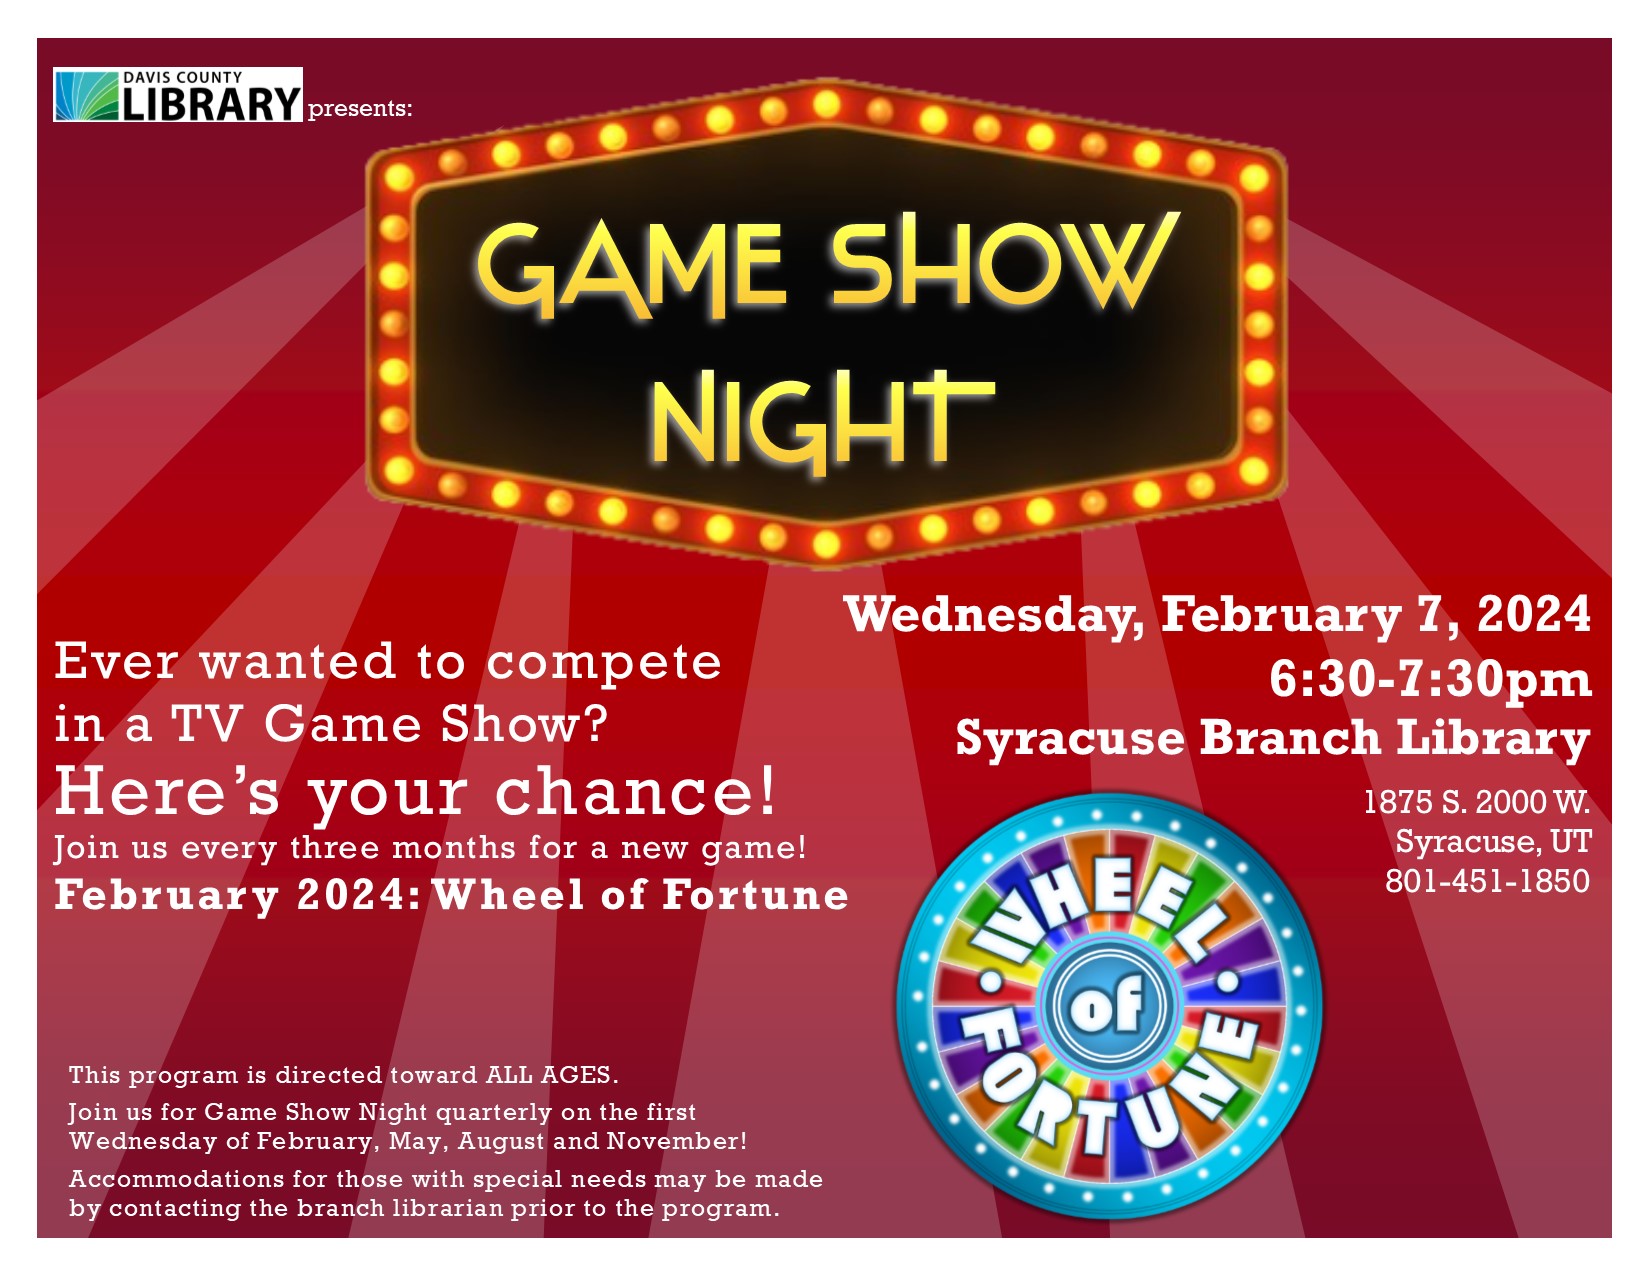 Ever wanted to compete in a TV Game Show? Here’s your chance! Join us every three months for a new game! February 2024: Wheel of Fortune